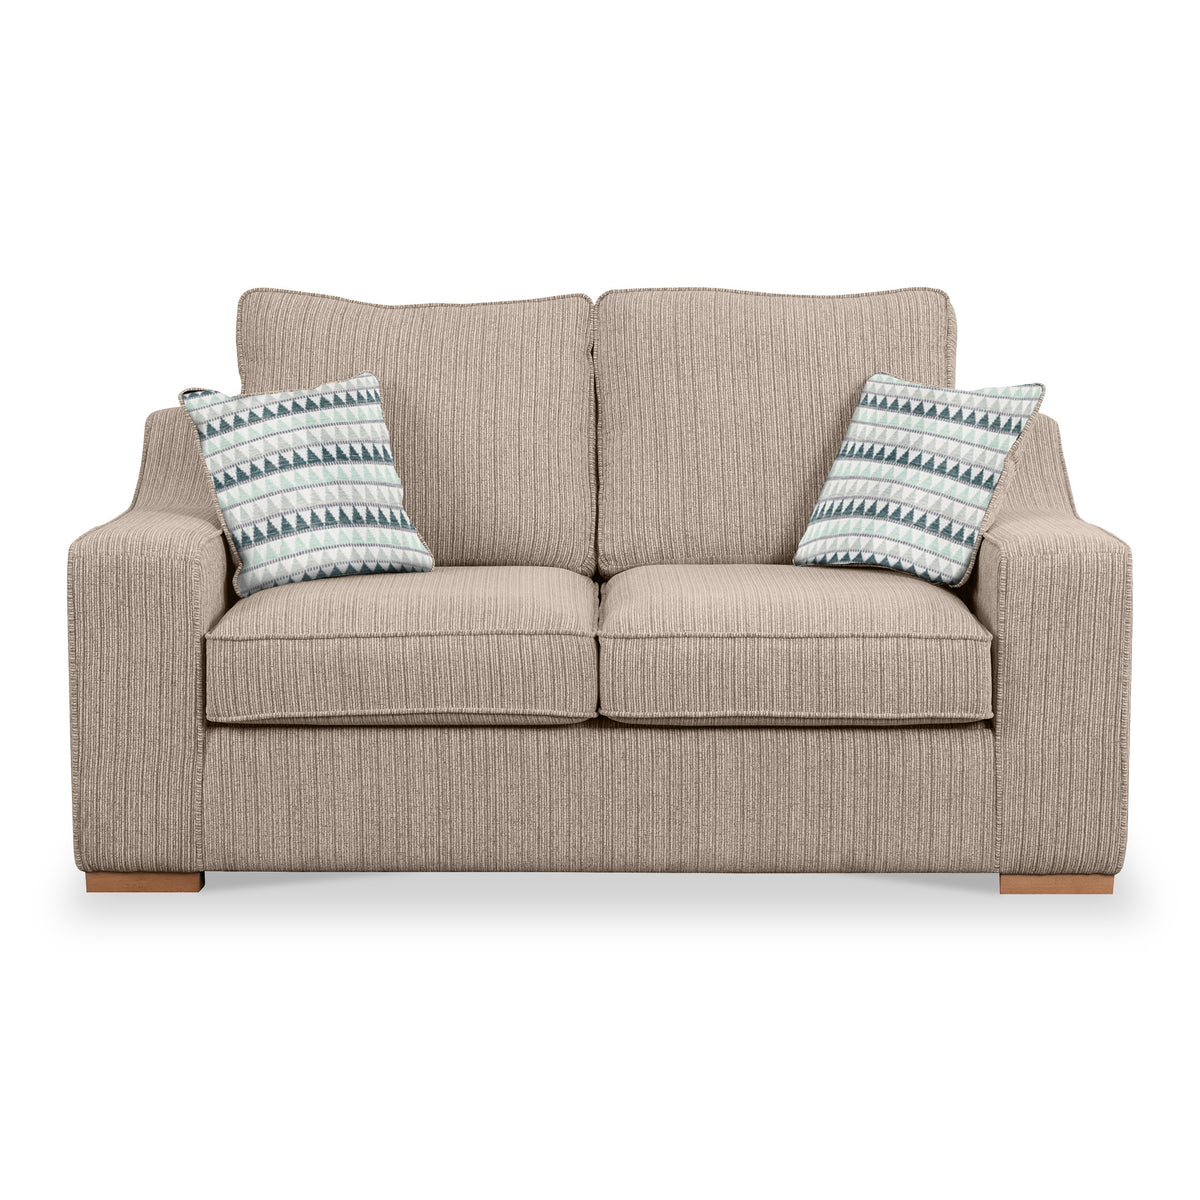 Ashow Beige 2 Seater Sofabed with Maika Jade Scatter Cushions from Roseland Furniture